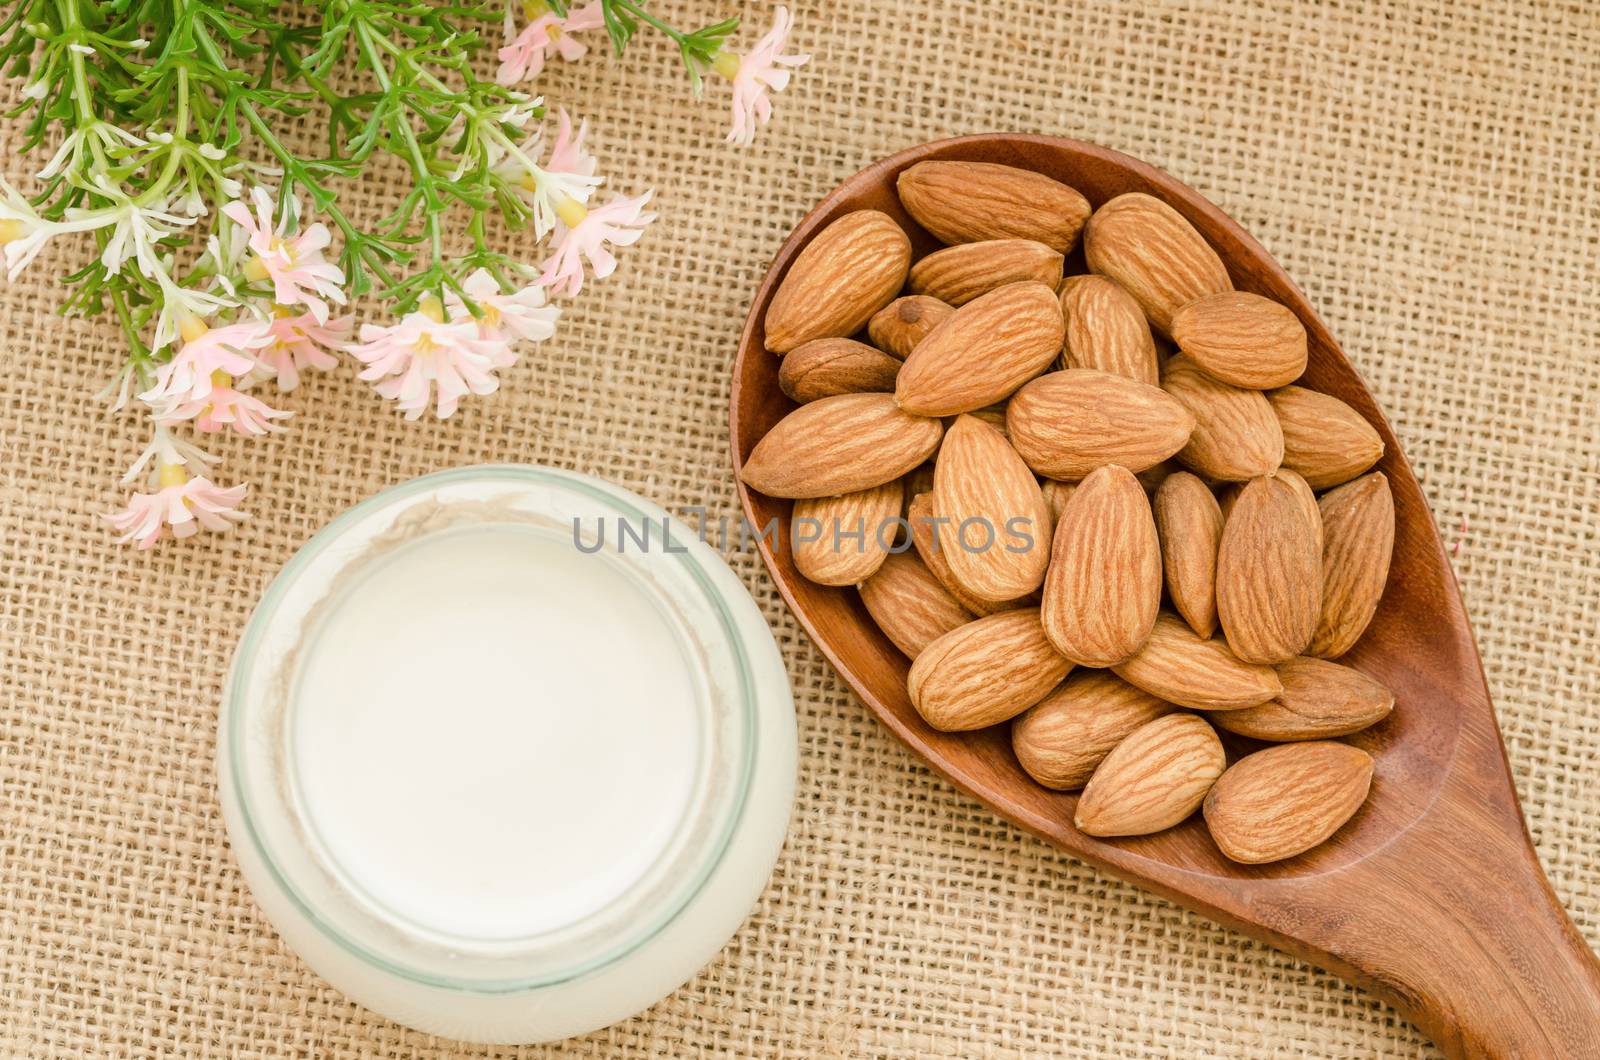 Almond milk with almond on a wooden spoon with flower on sack background.